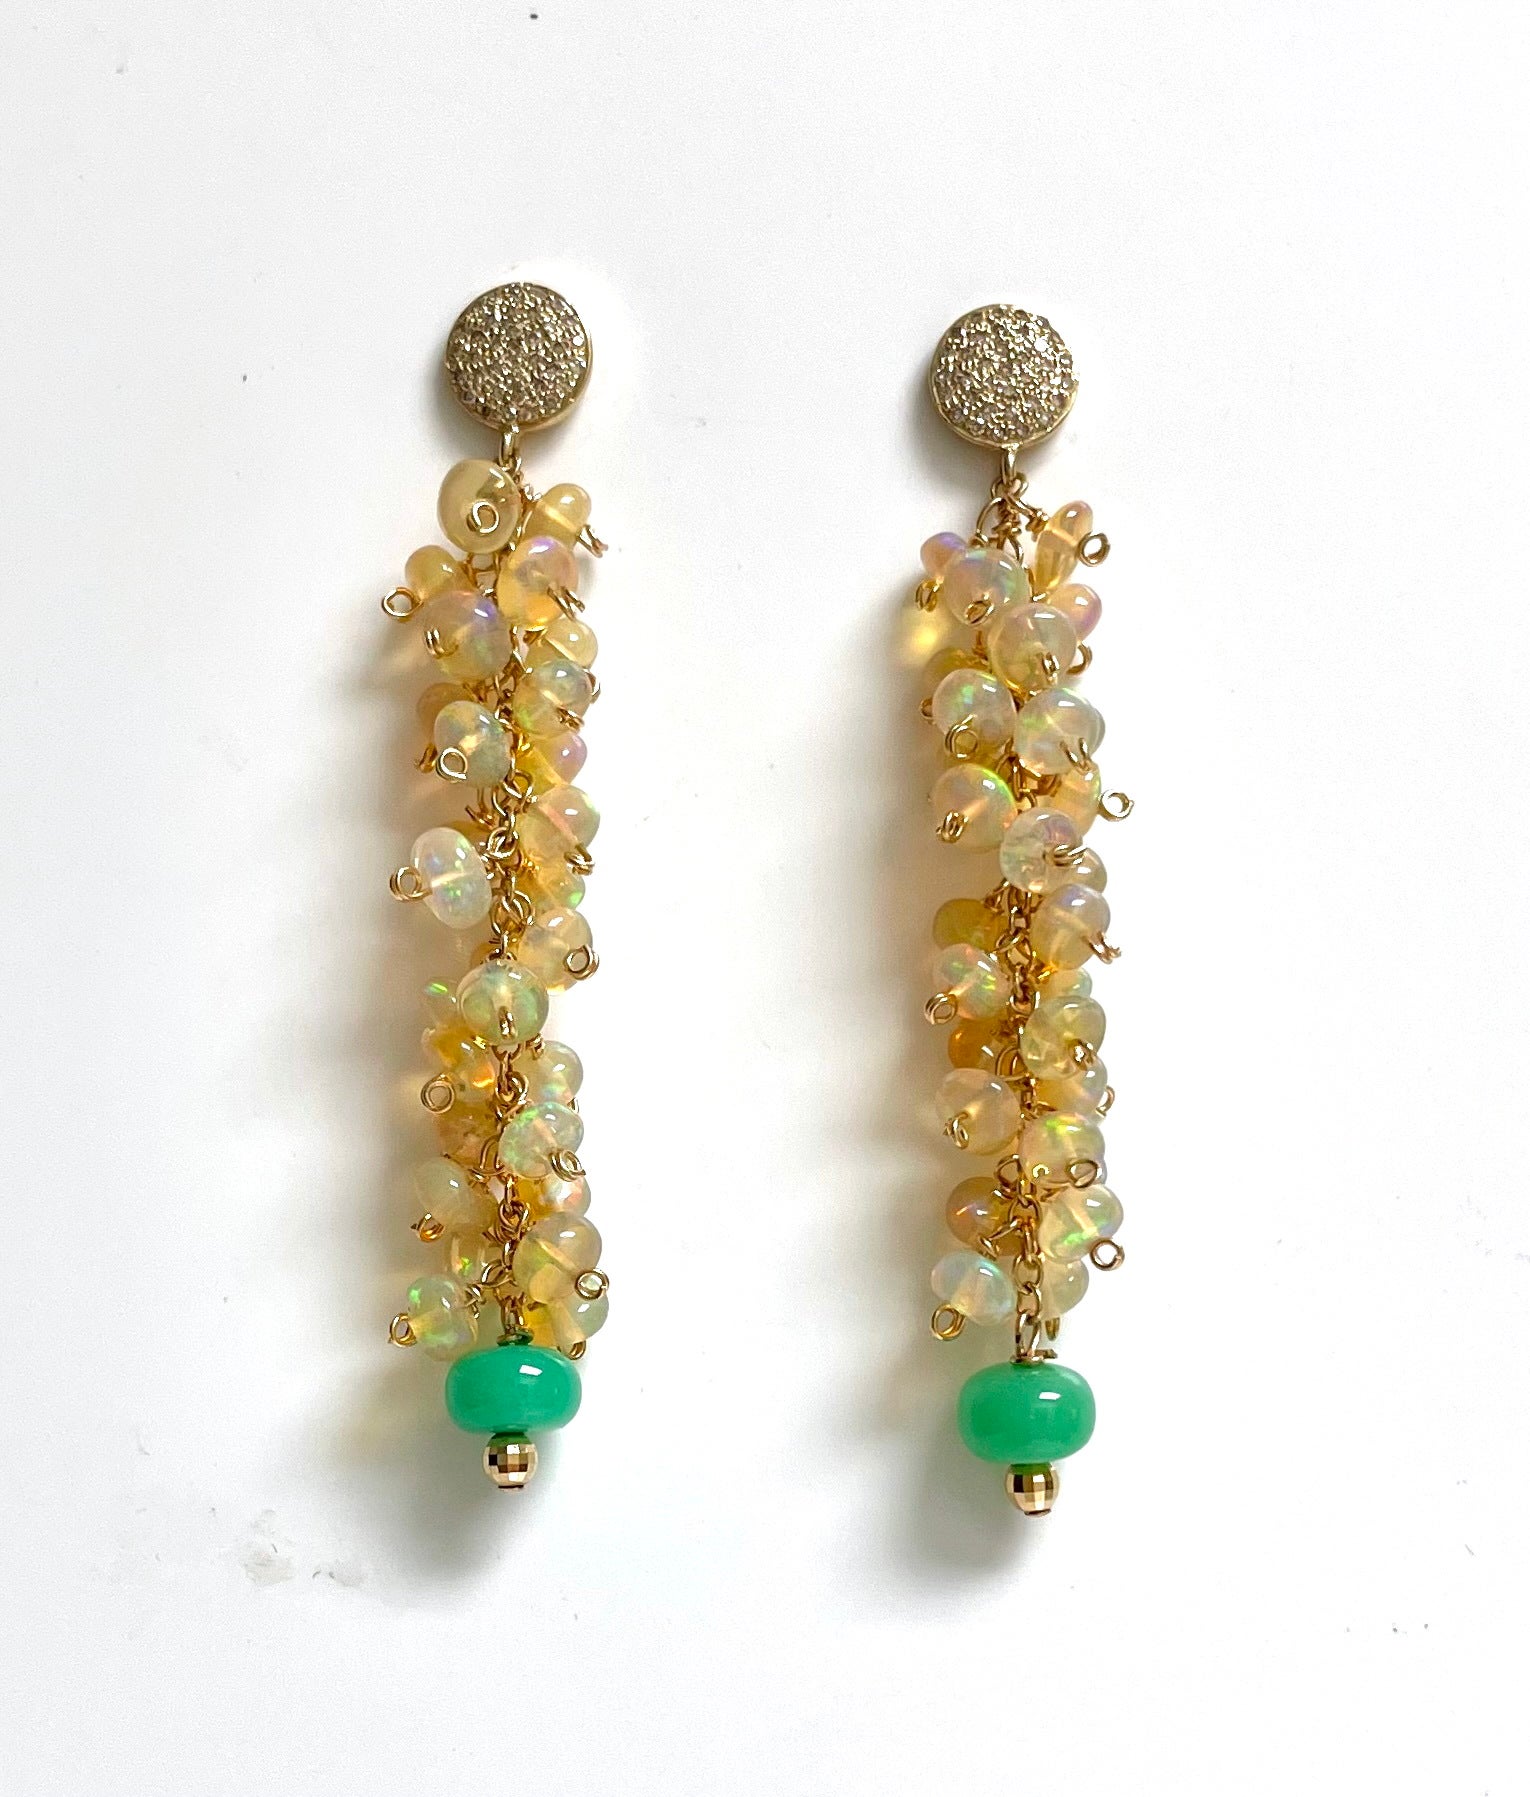 Description
Light up a room as you walk in style glowing in opal iridescence. These exquisite Ethiopian Opal hand crafted clusters are of superior quality and harmoniously interact with the vibrant green Chrysoprase drops creating a luscious and